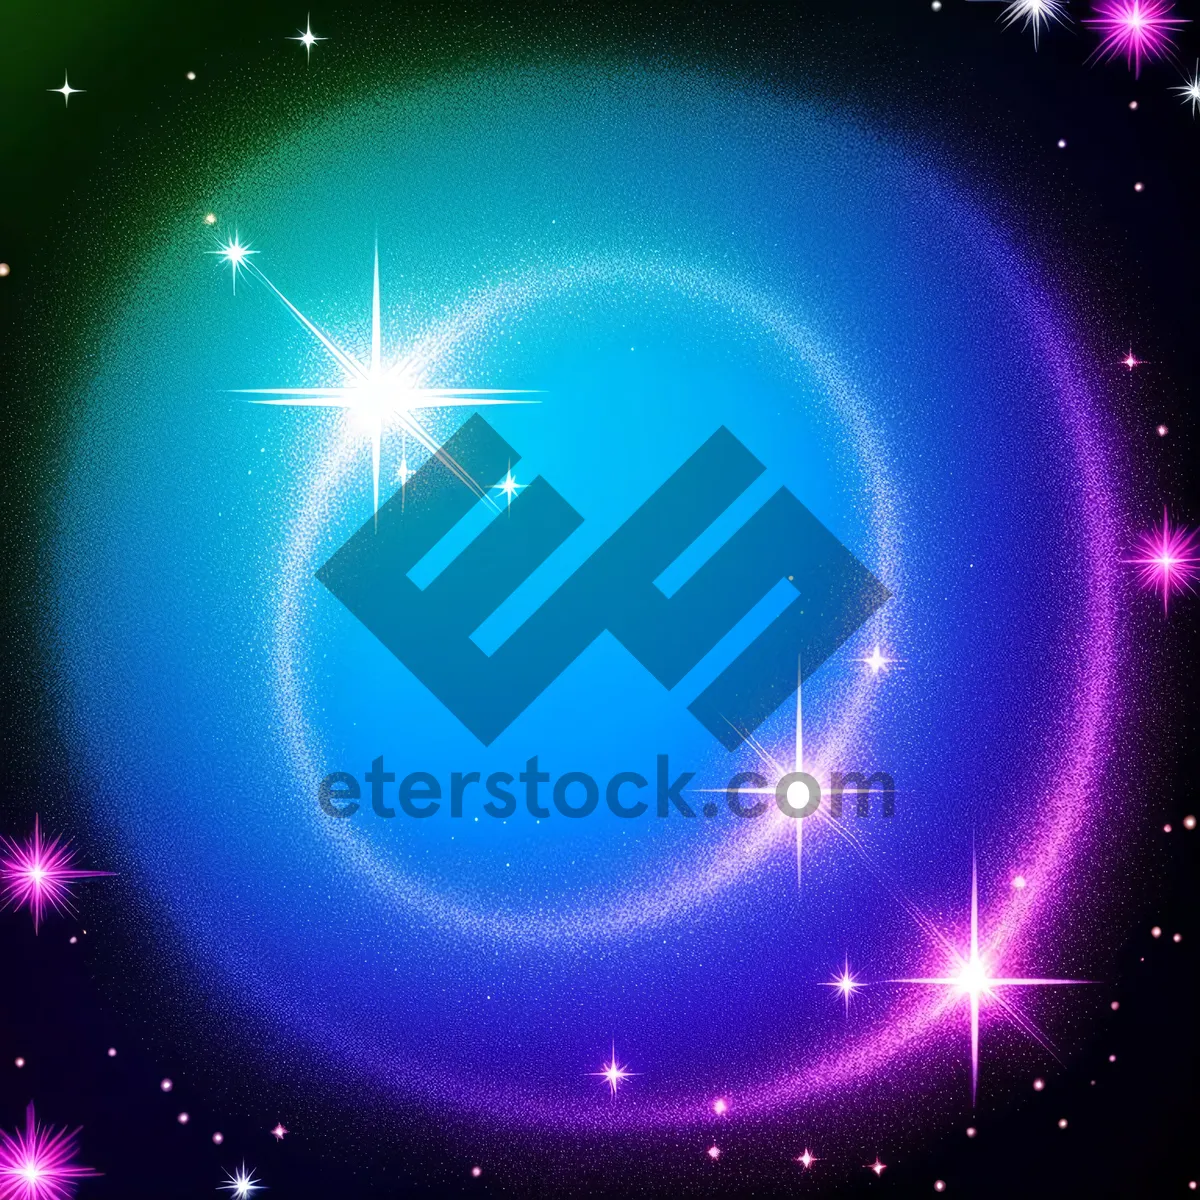 Picture of Cosmic Night Sky - Glowing Starlight and Futuristic Design